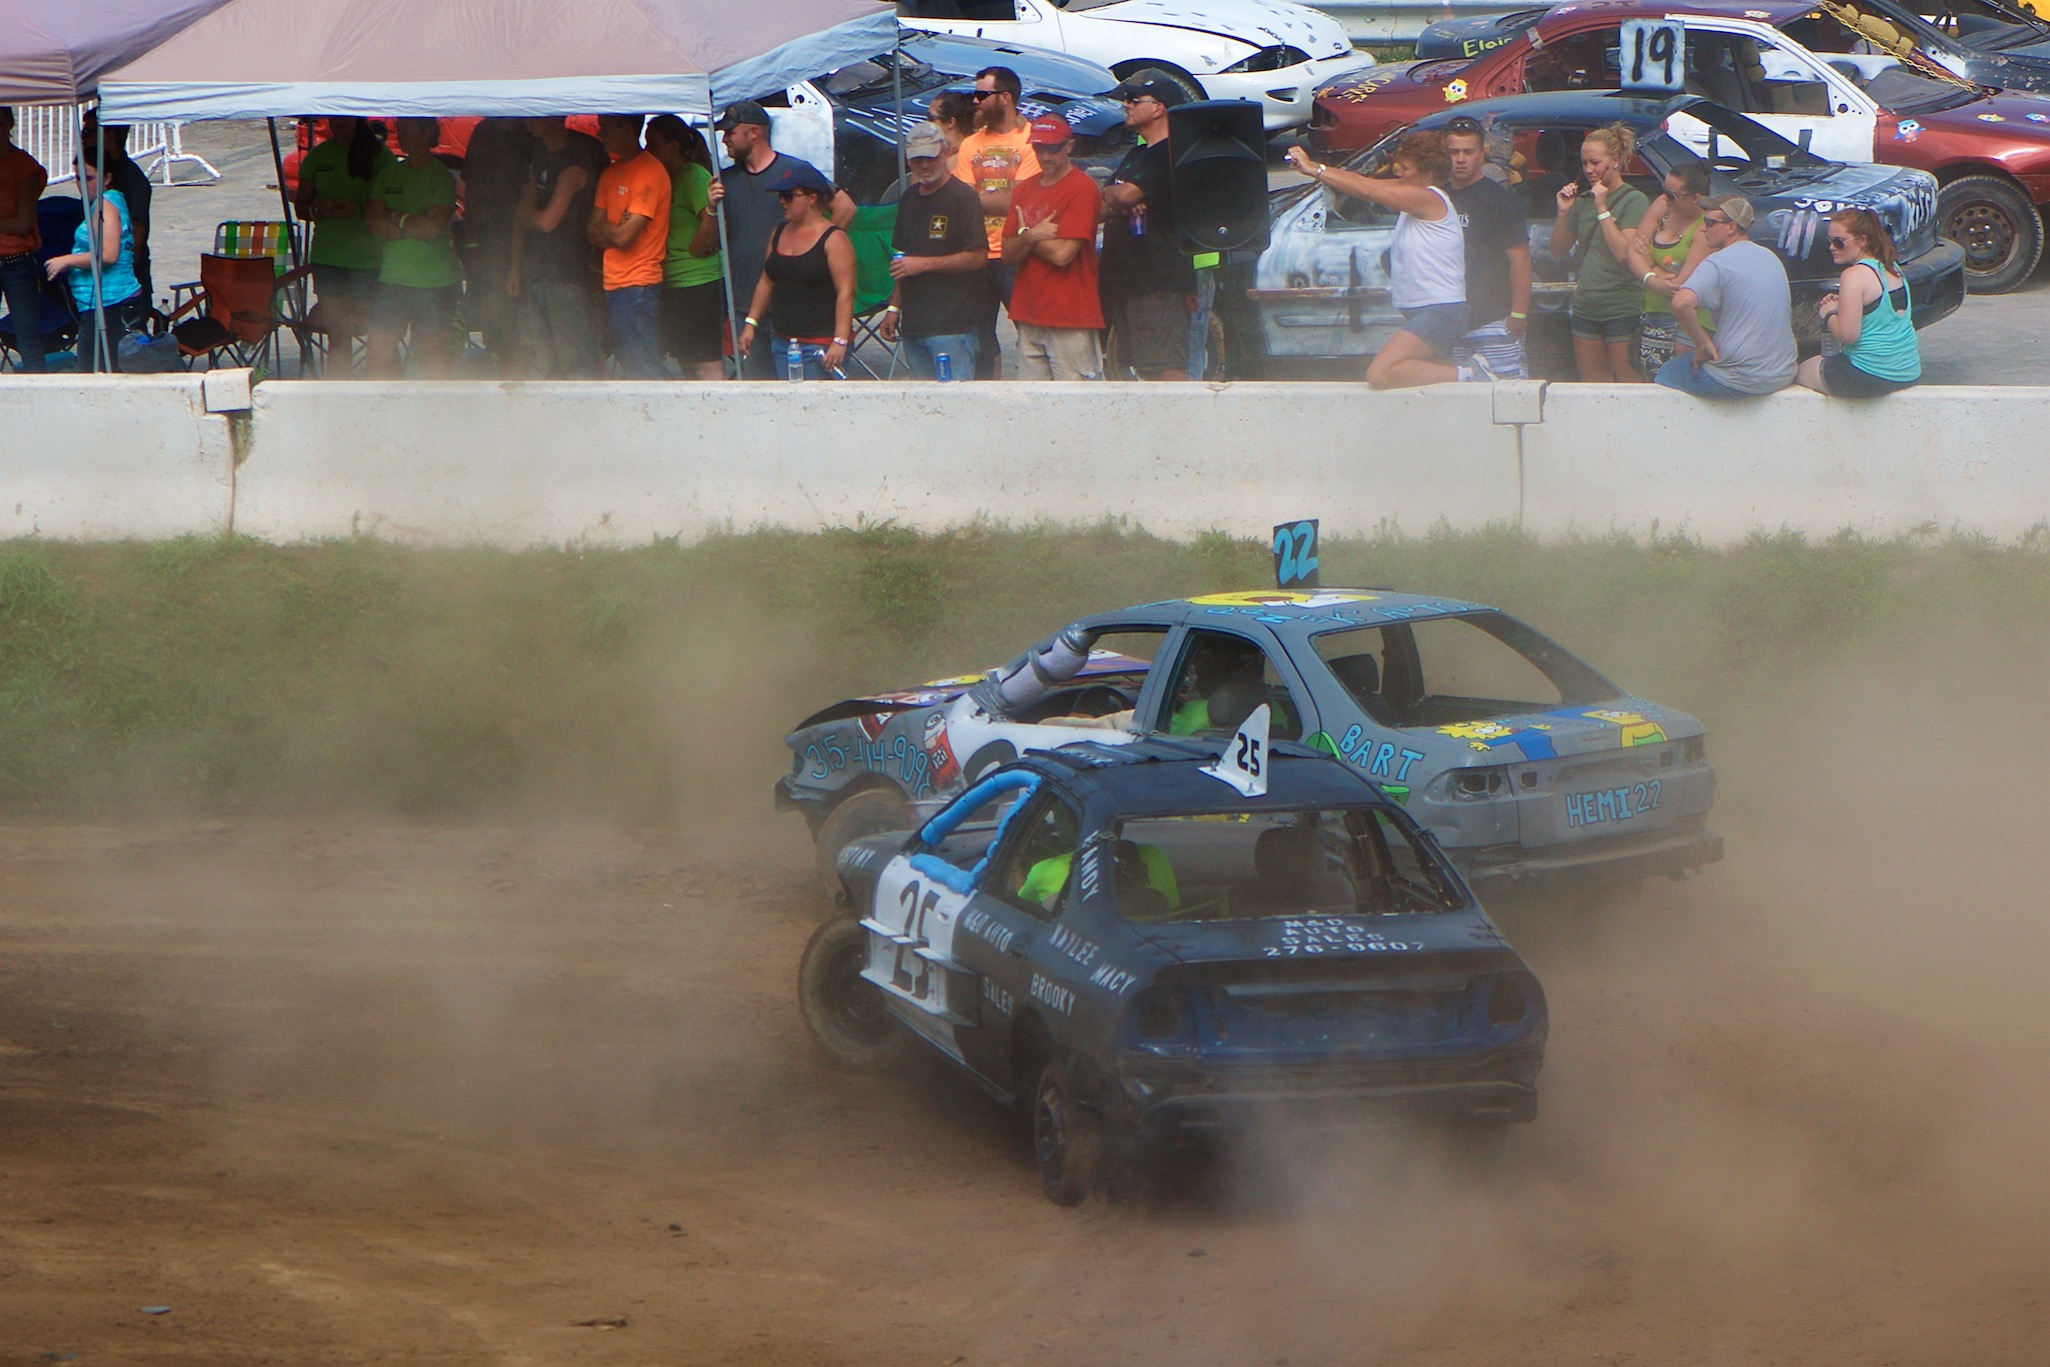 Demolition Derby at the New York State Fair in Syracuse, New York